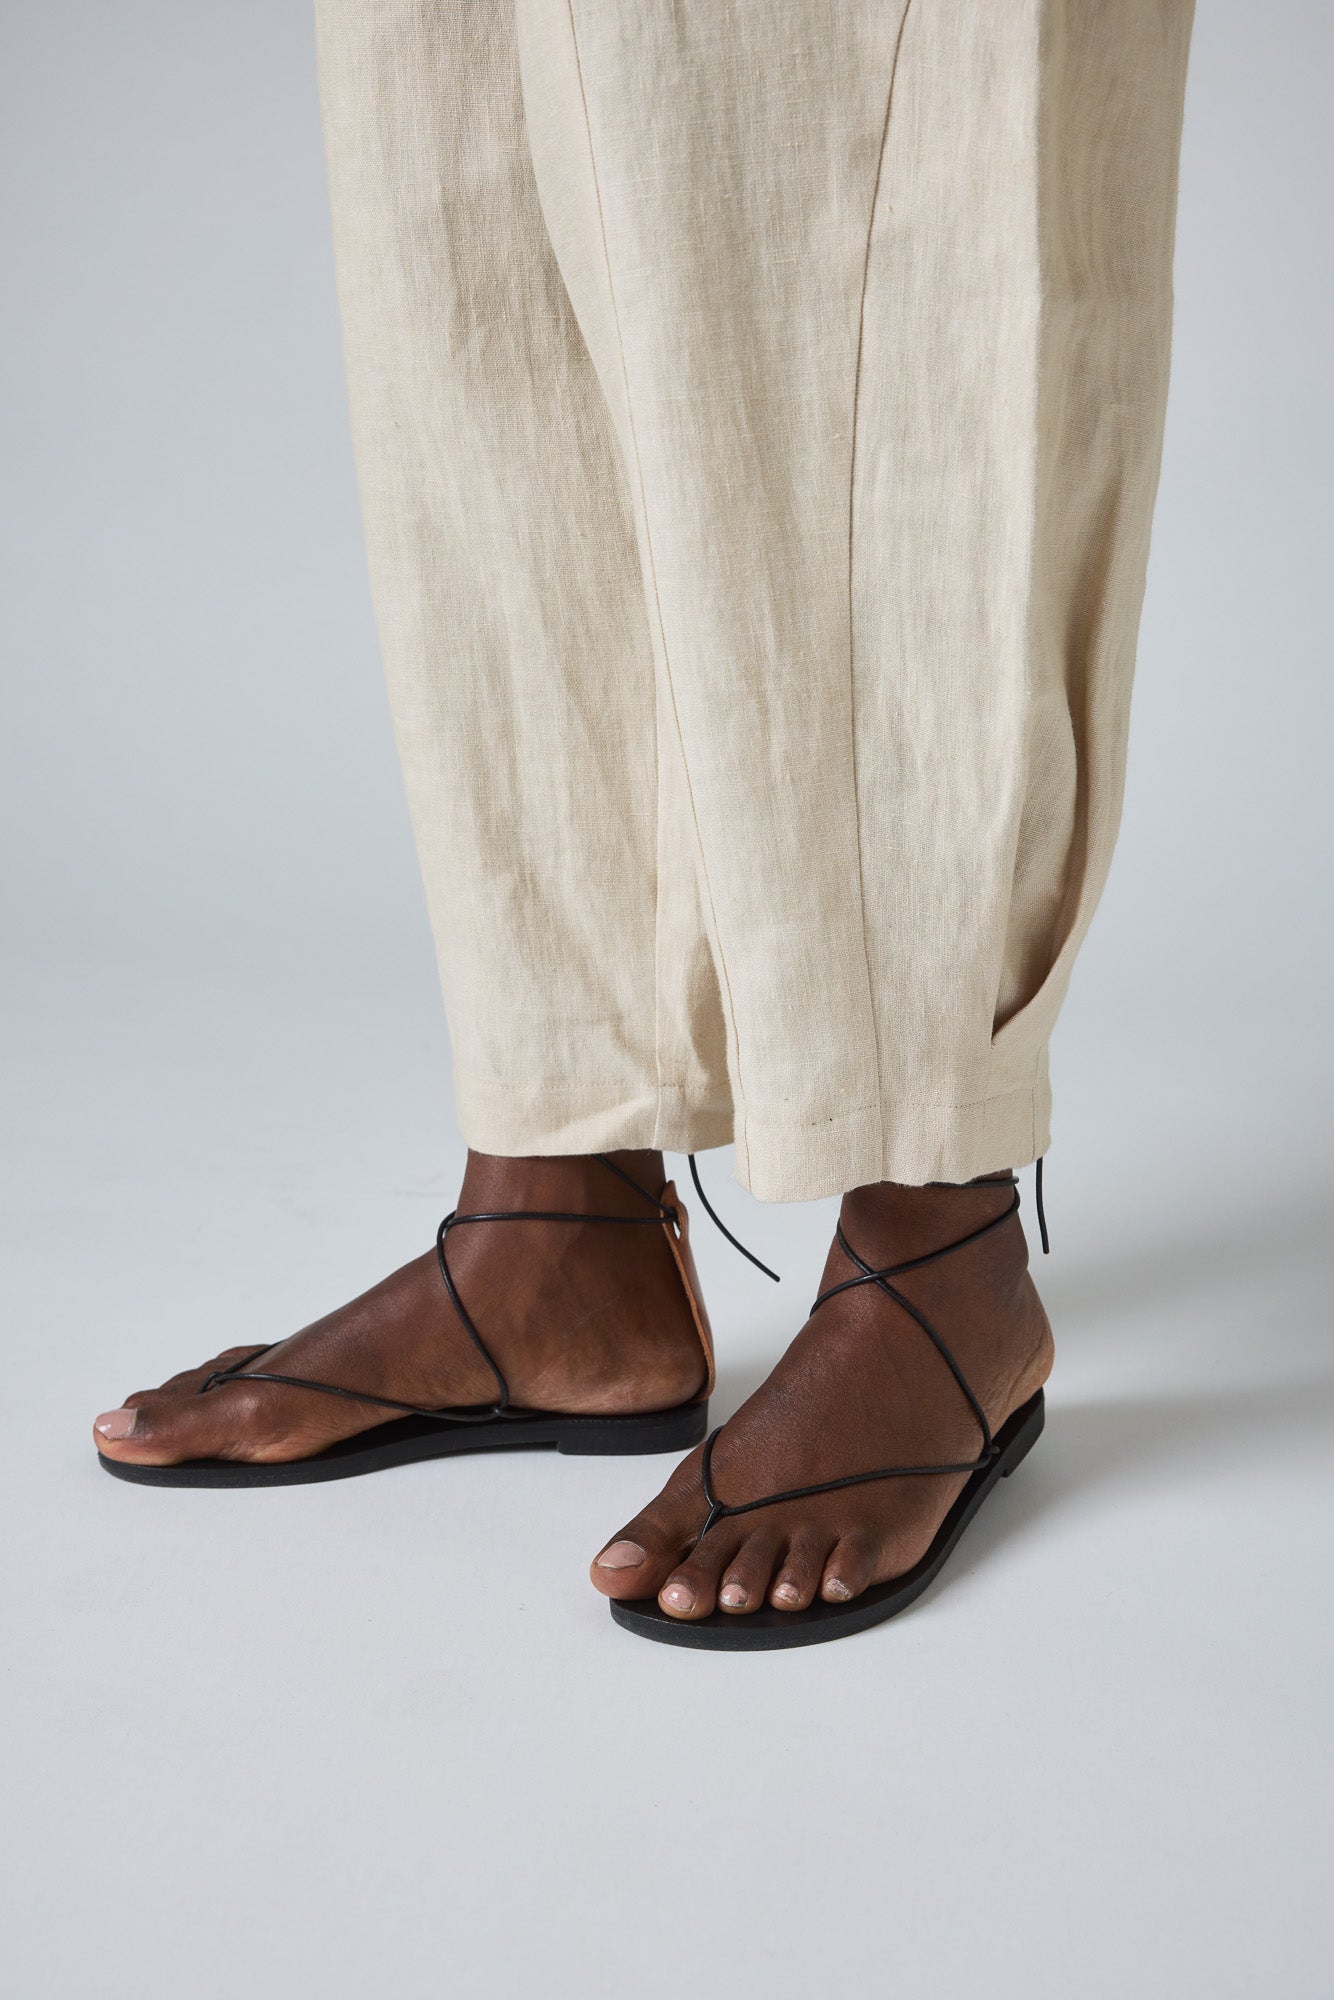 The Tall Untailored Tapered Pant in Striped 100% Linen